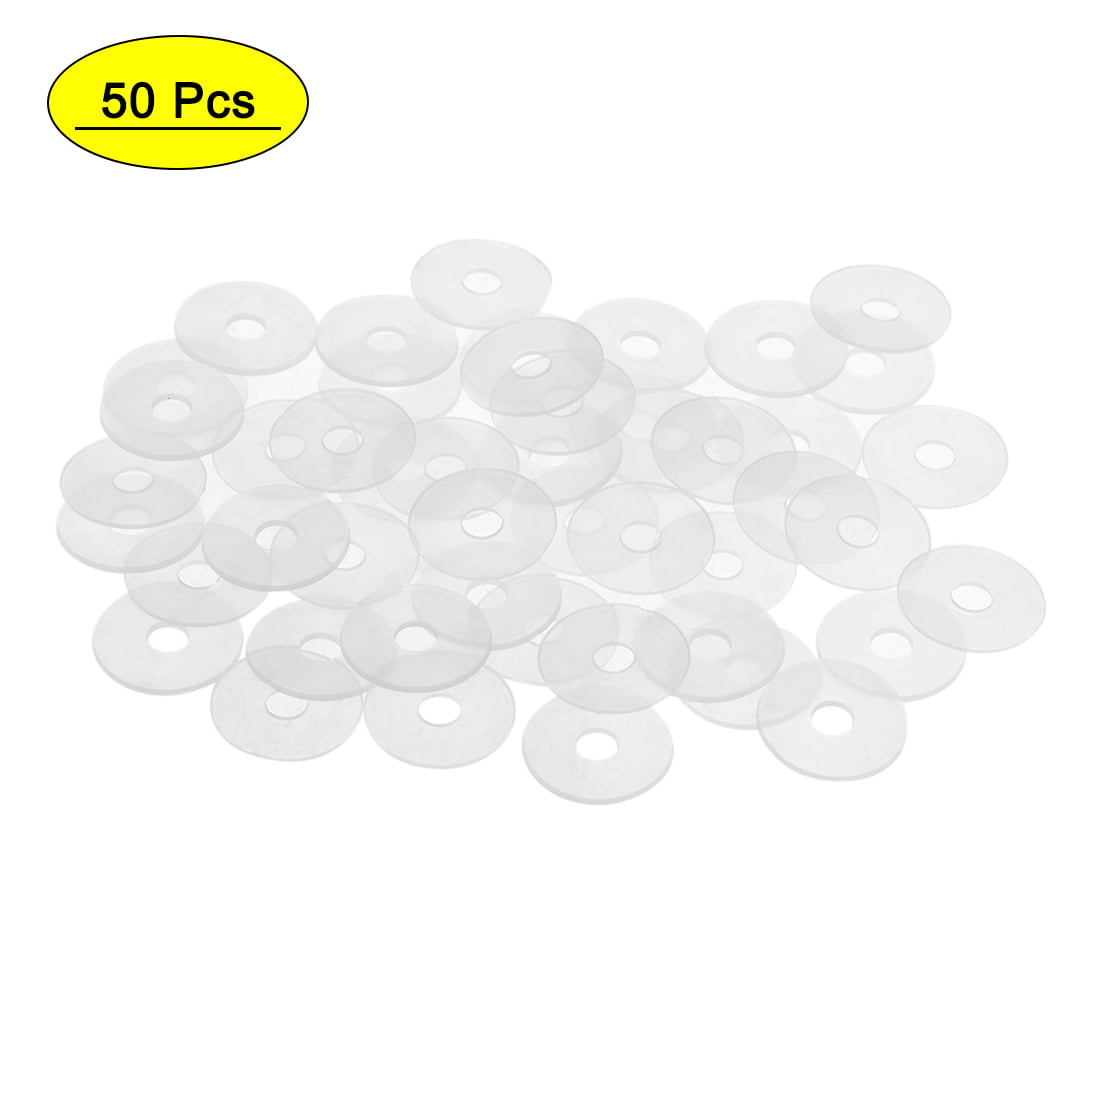 500 X M5 WHITE CLEAR NYLON PLASTIC SPACER WASHERS M5 SCREWS AND BOLTS 3mm THICK 